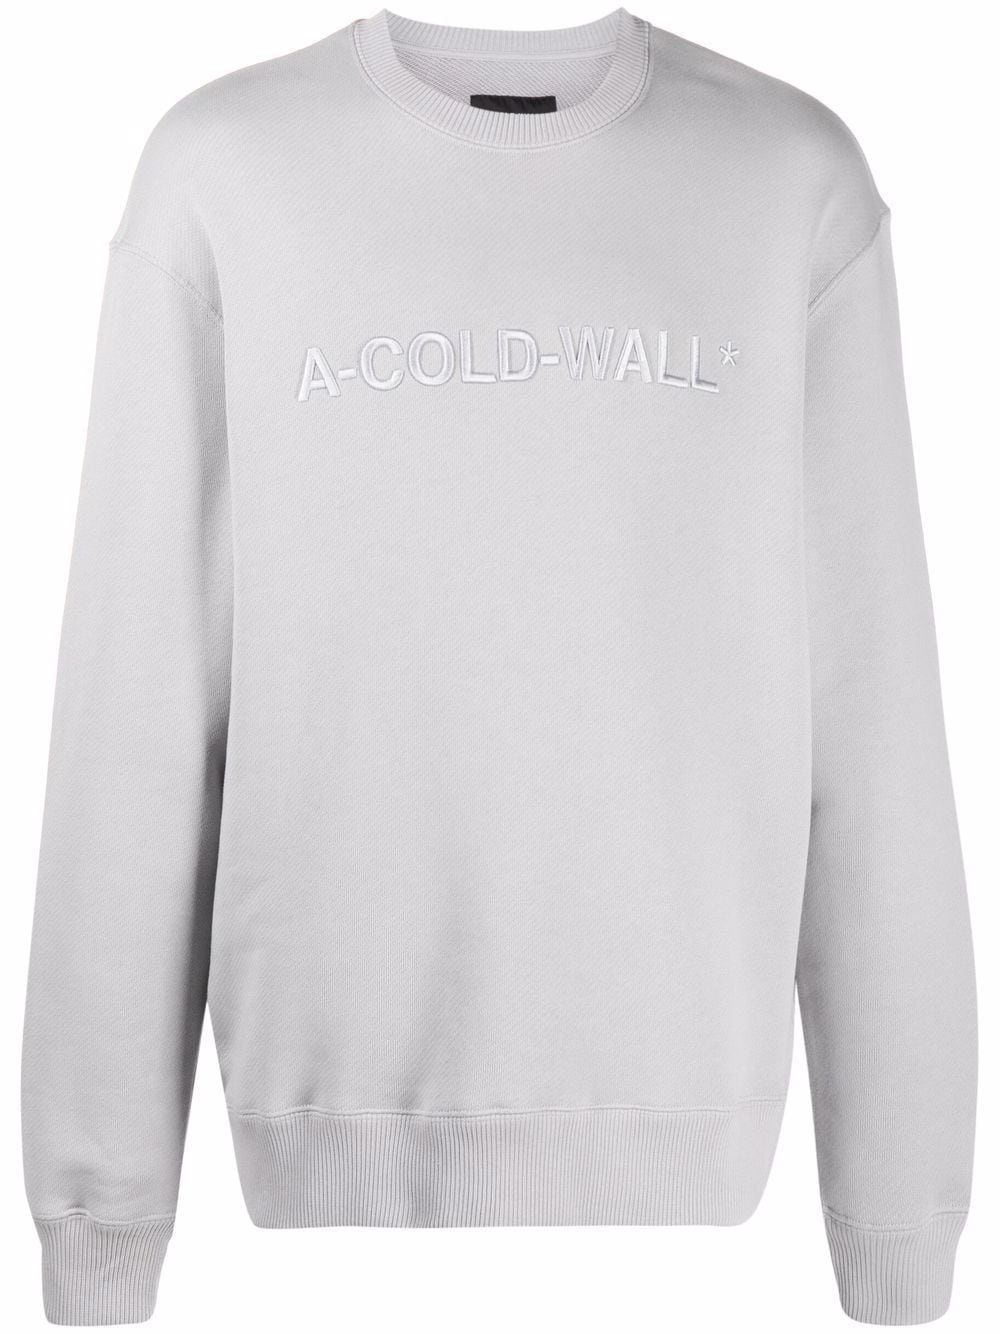 A-COLD-WALL* logo-embroidered cotton sweatshirt - Grey von A-COLD-WALL*